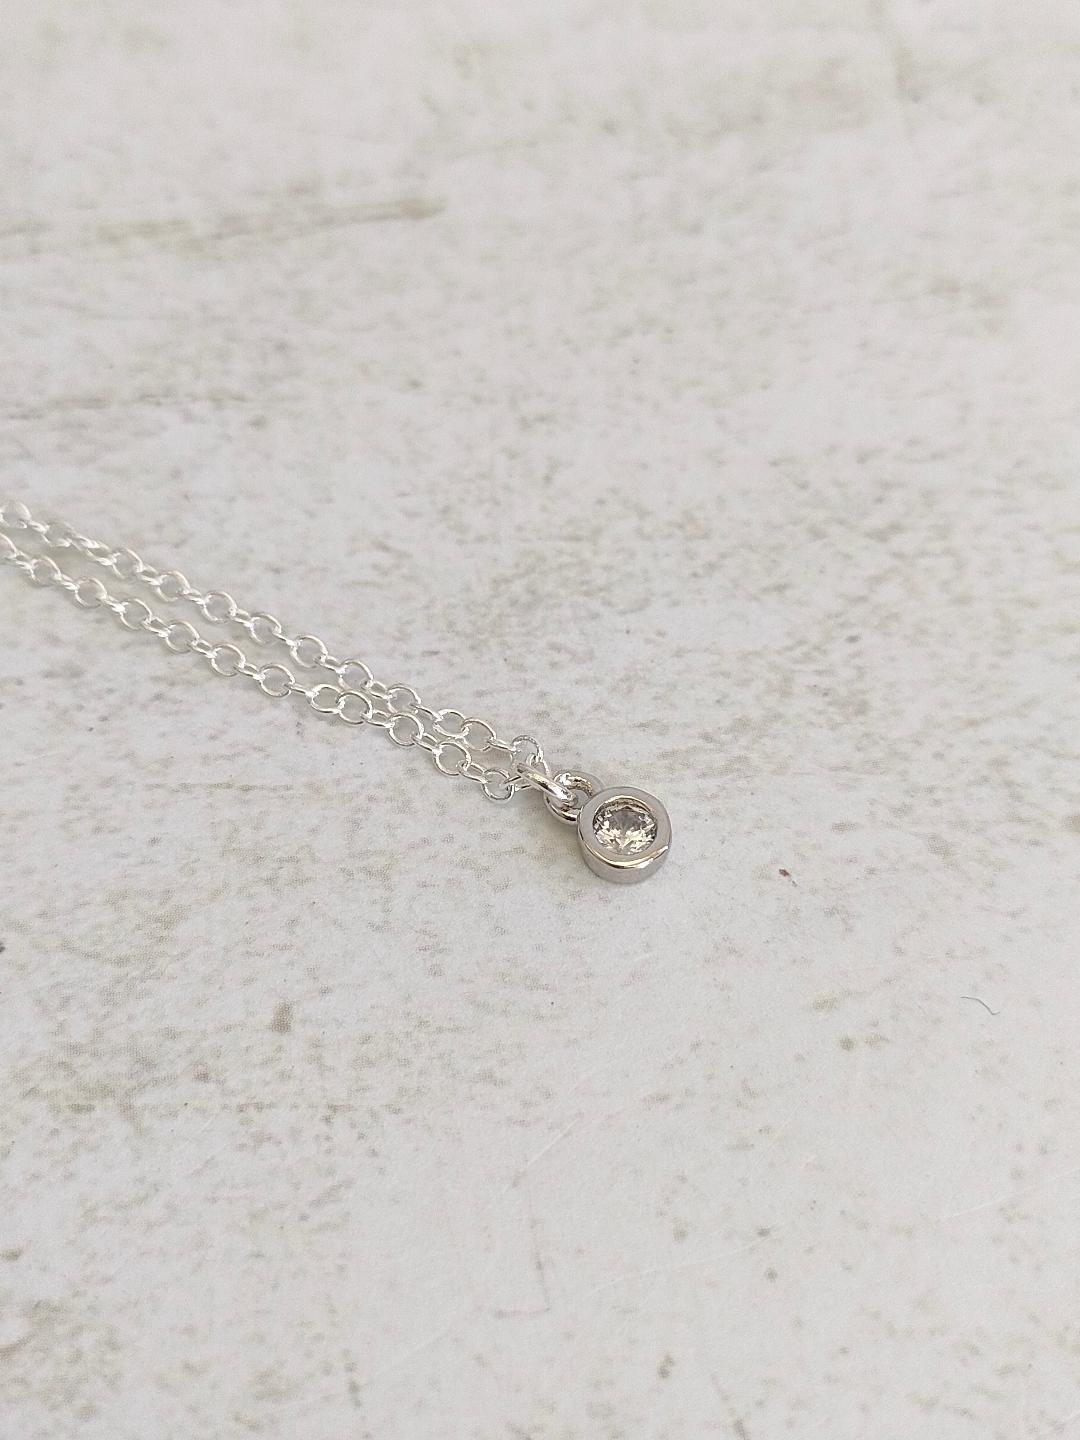 Cubic Zirconia Necklace, Tiny Round CZ Pendant Necklace, Dainty Silver 925 Necklace, Gemstone Necklace for her